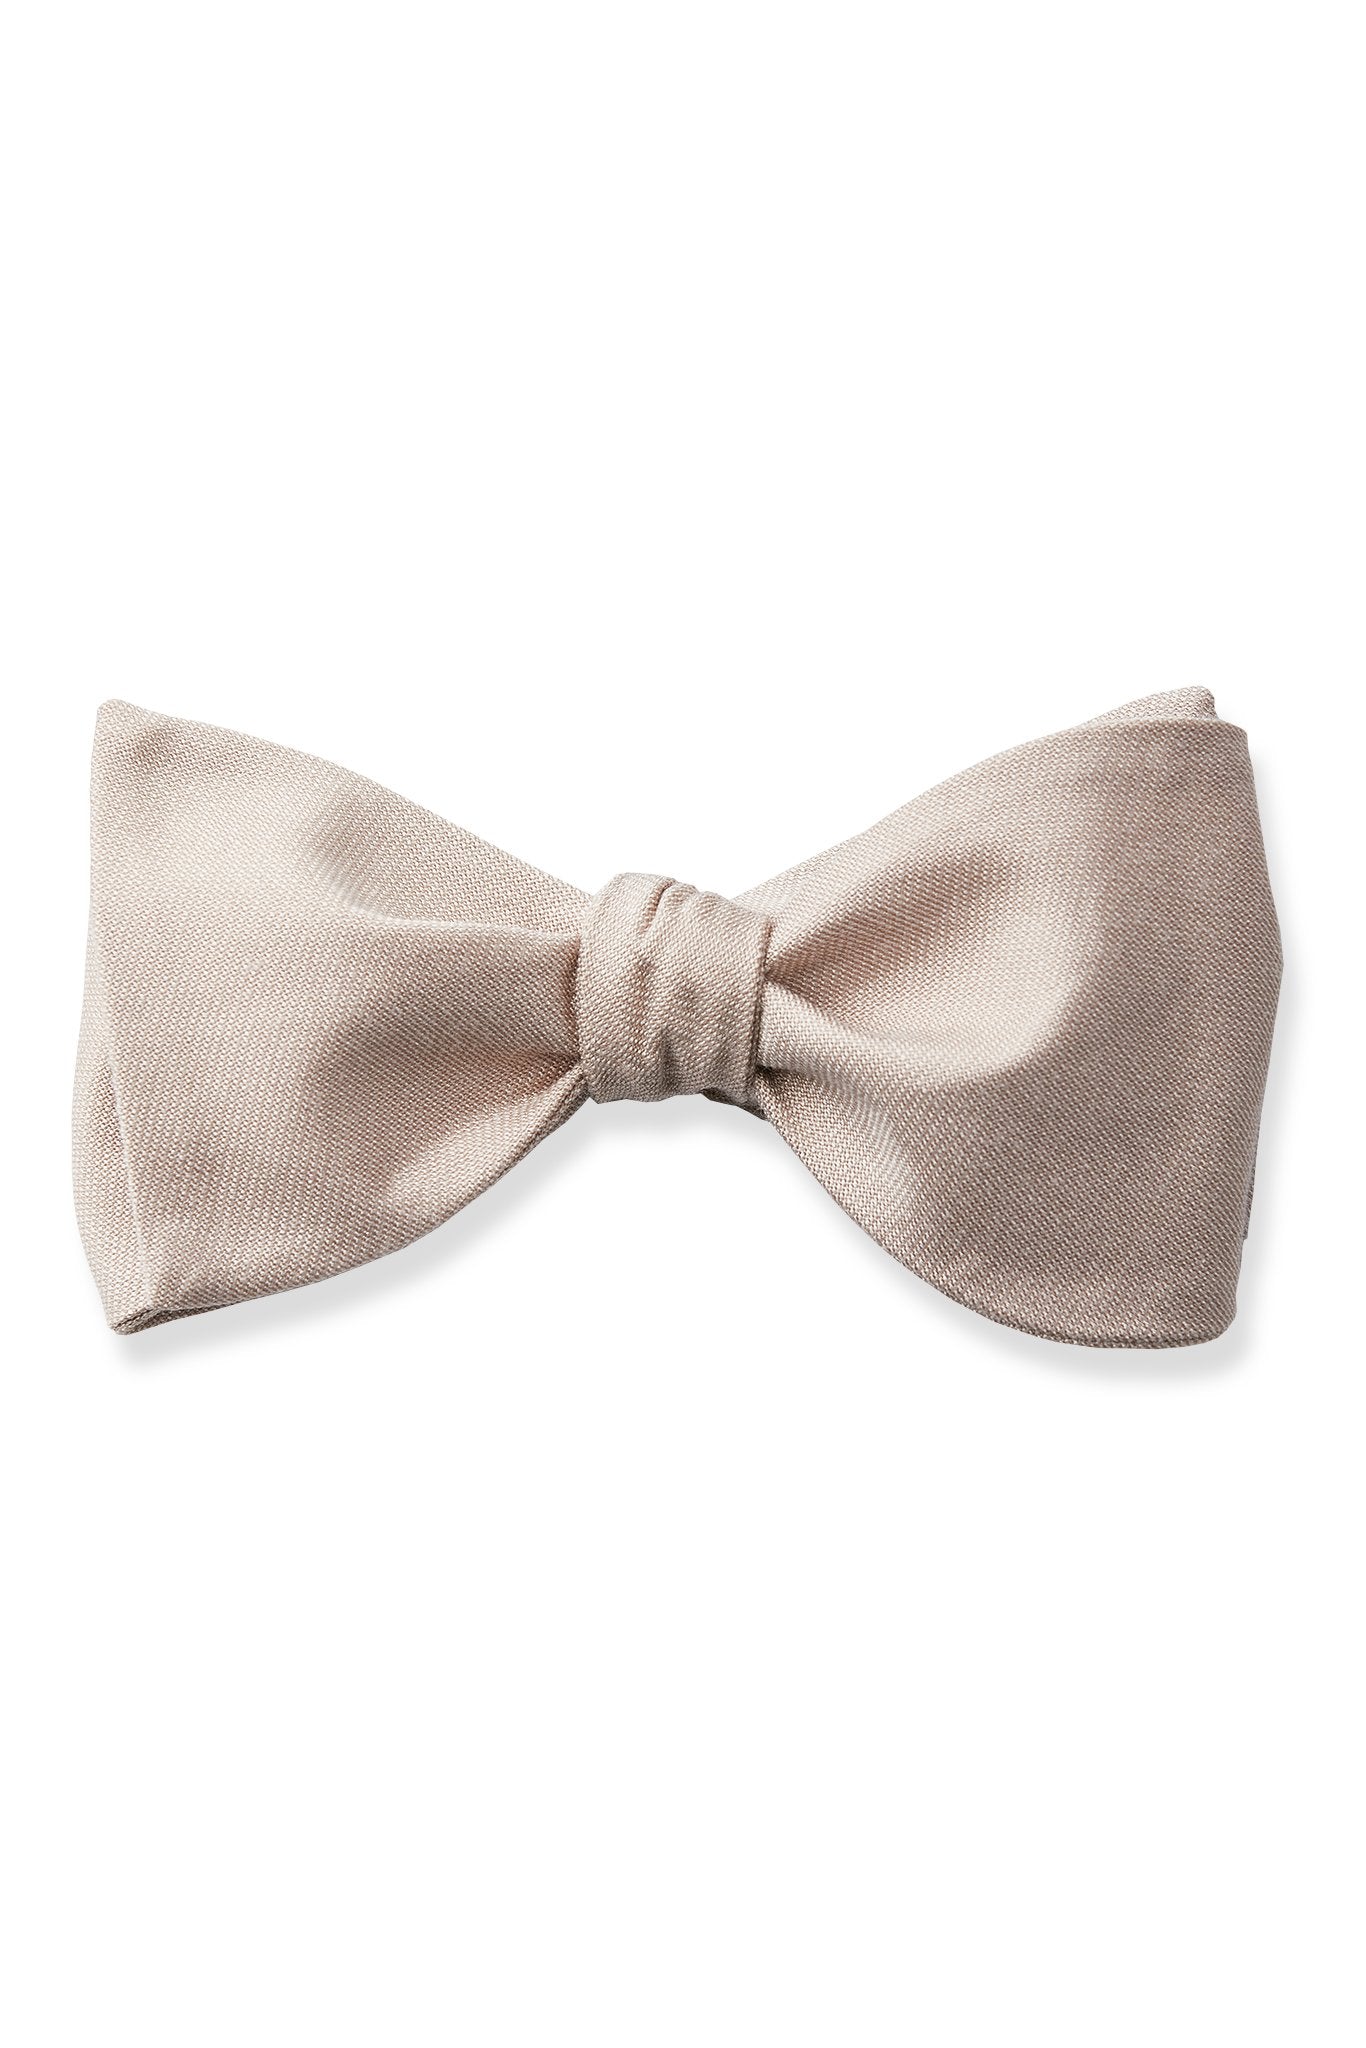 Daniel Bow Tie in taupe by Birdy Grey, front view